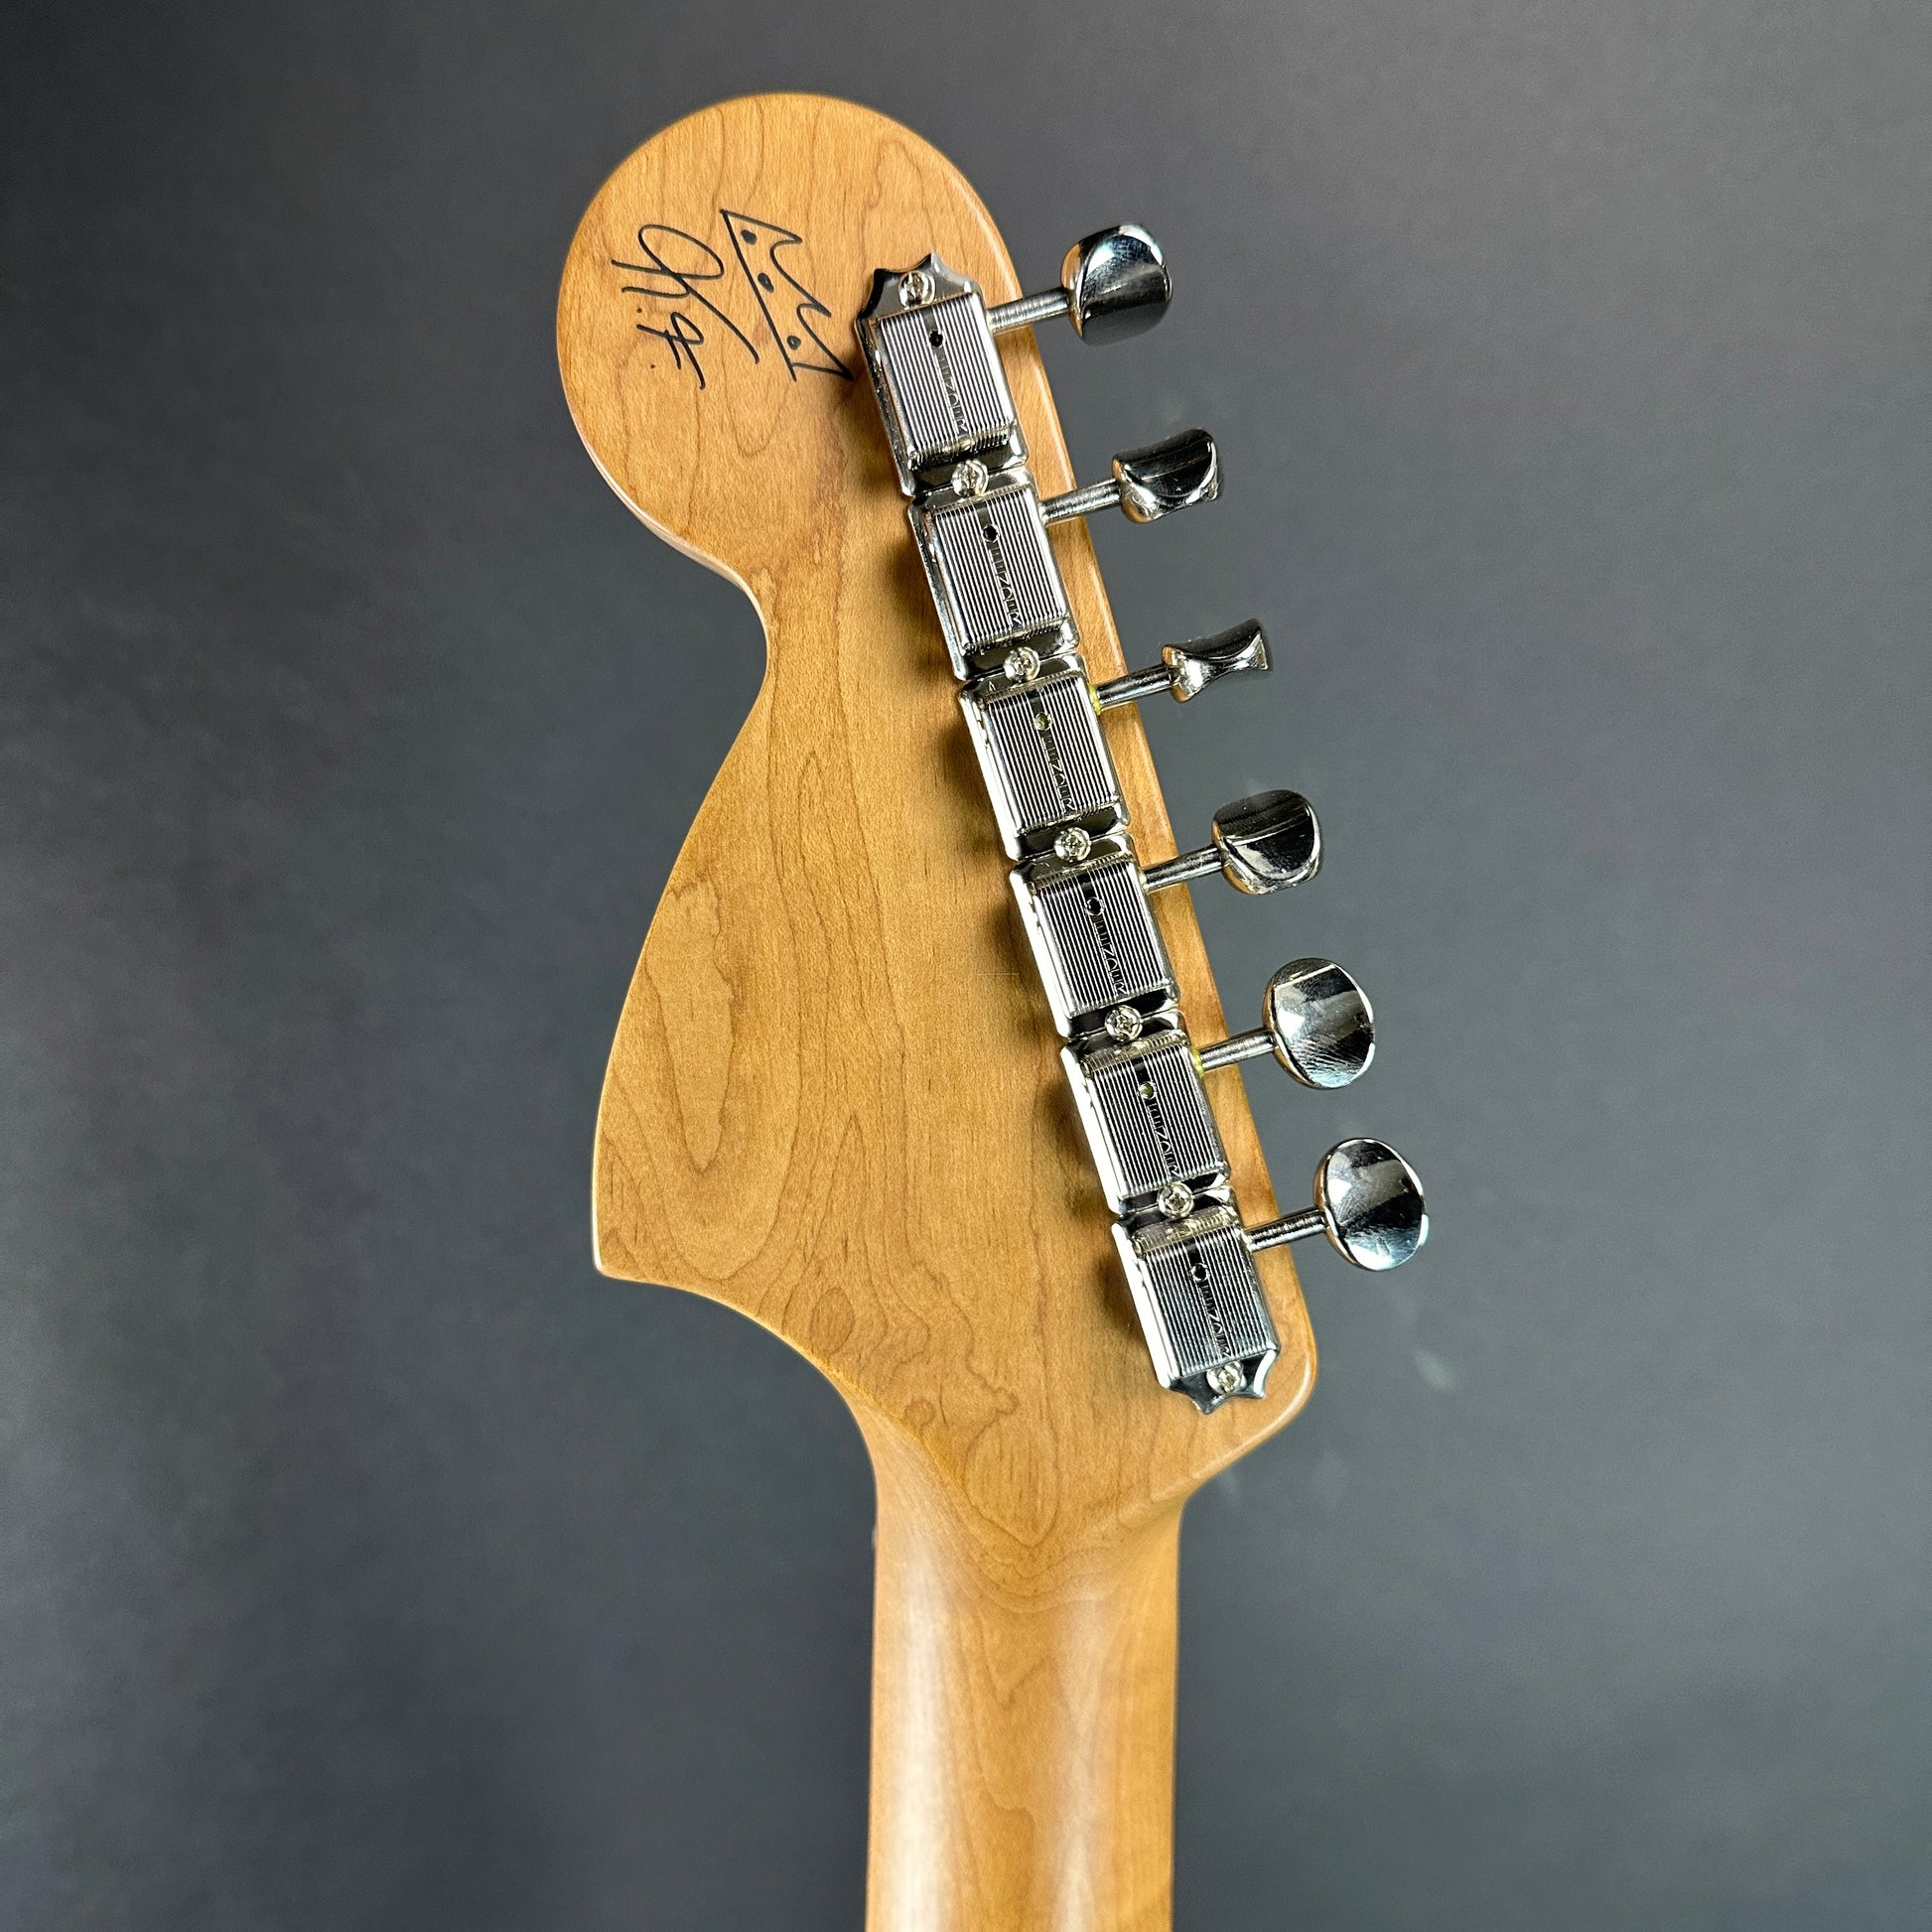 Back of headstock of Used Fender Kingfish Telecaster Deluxe Mississippi Night.